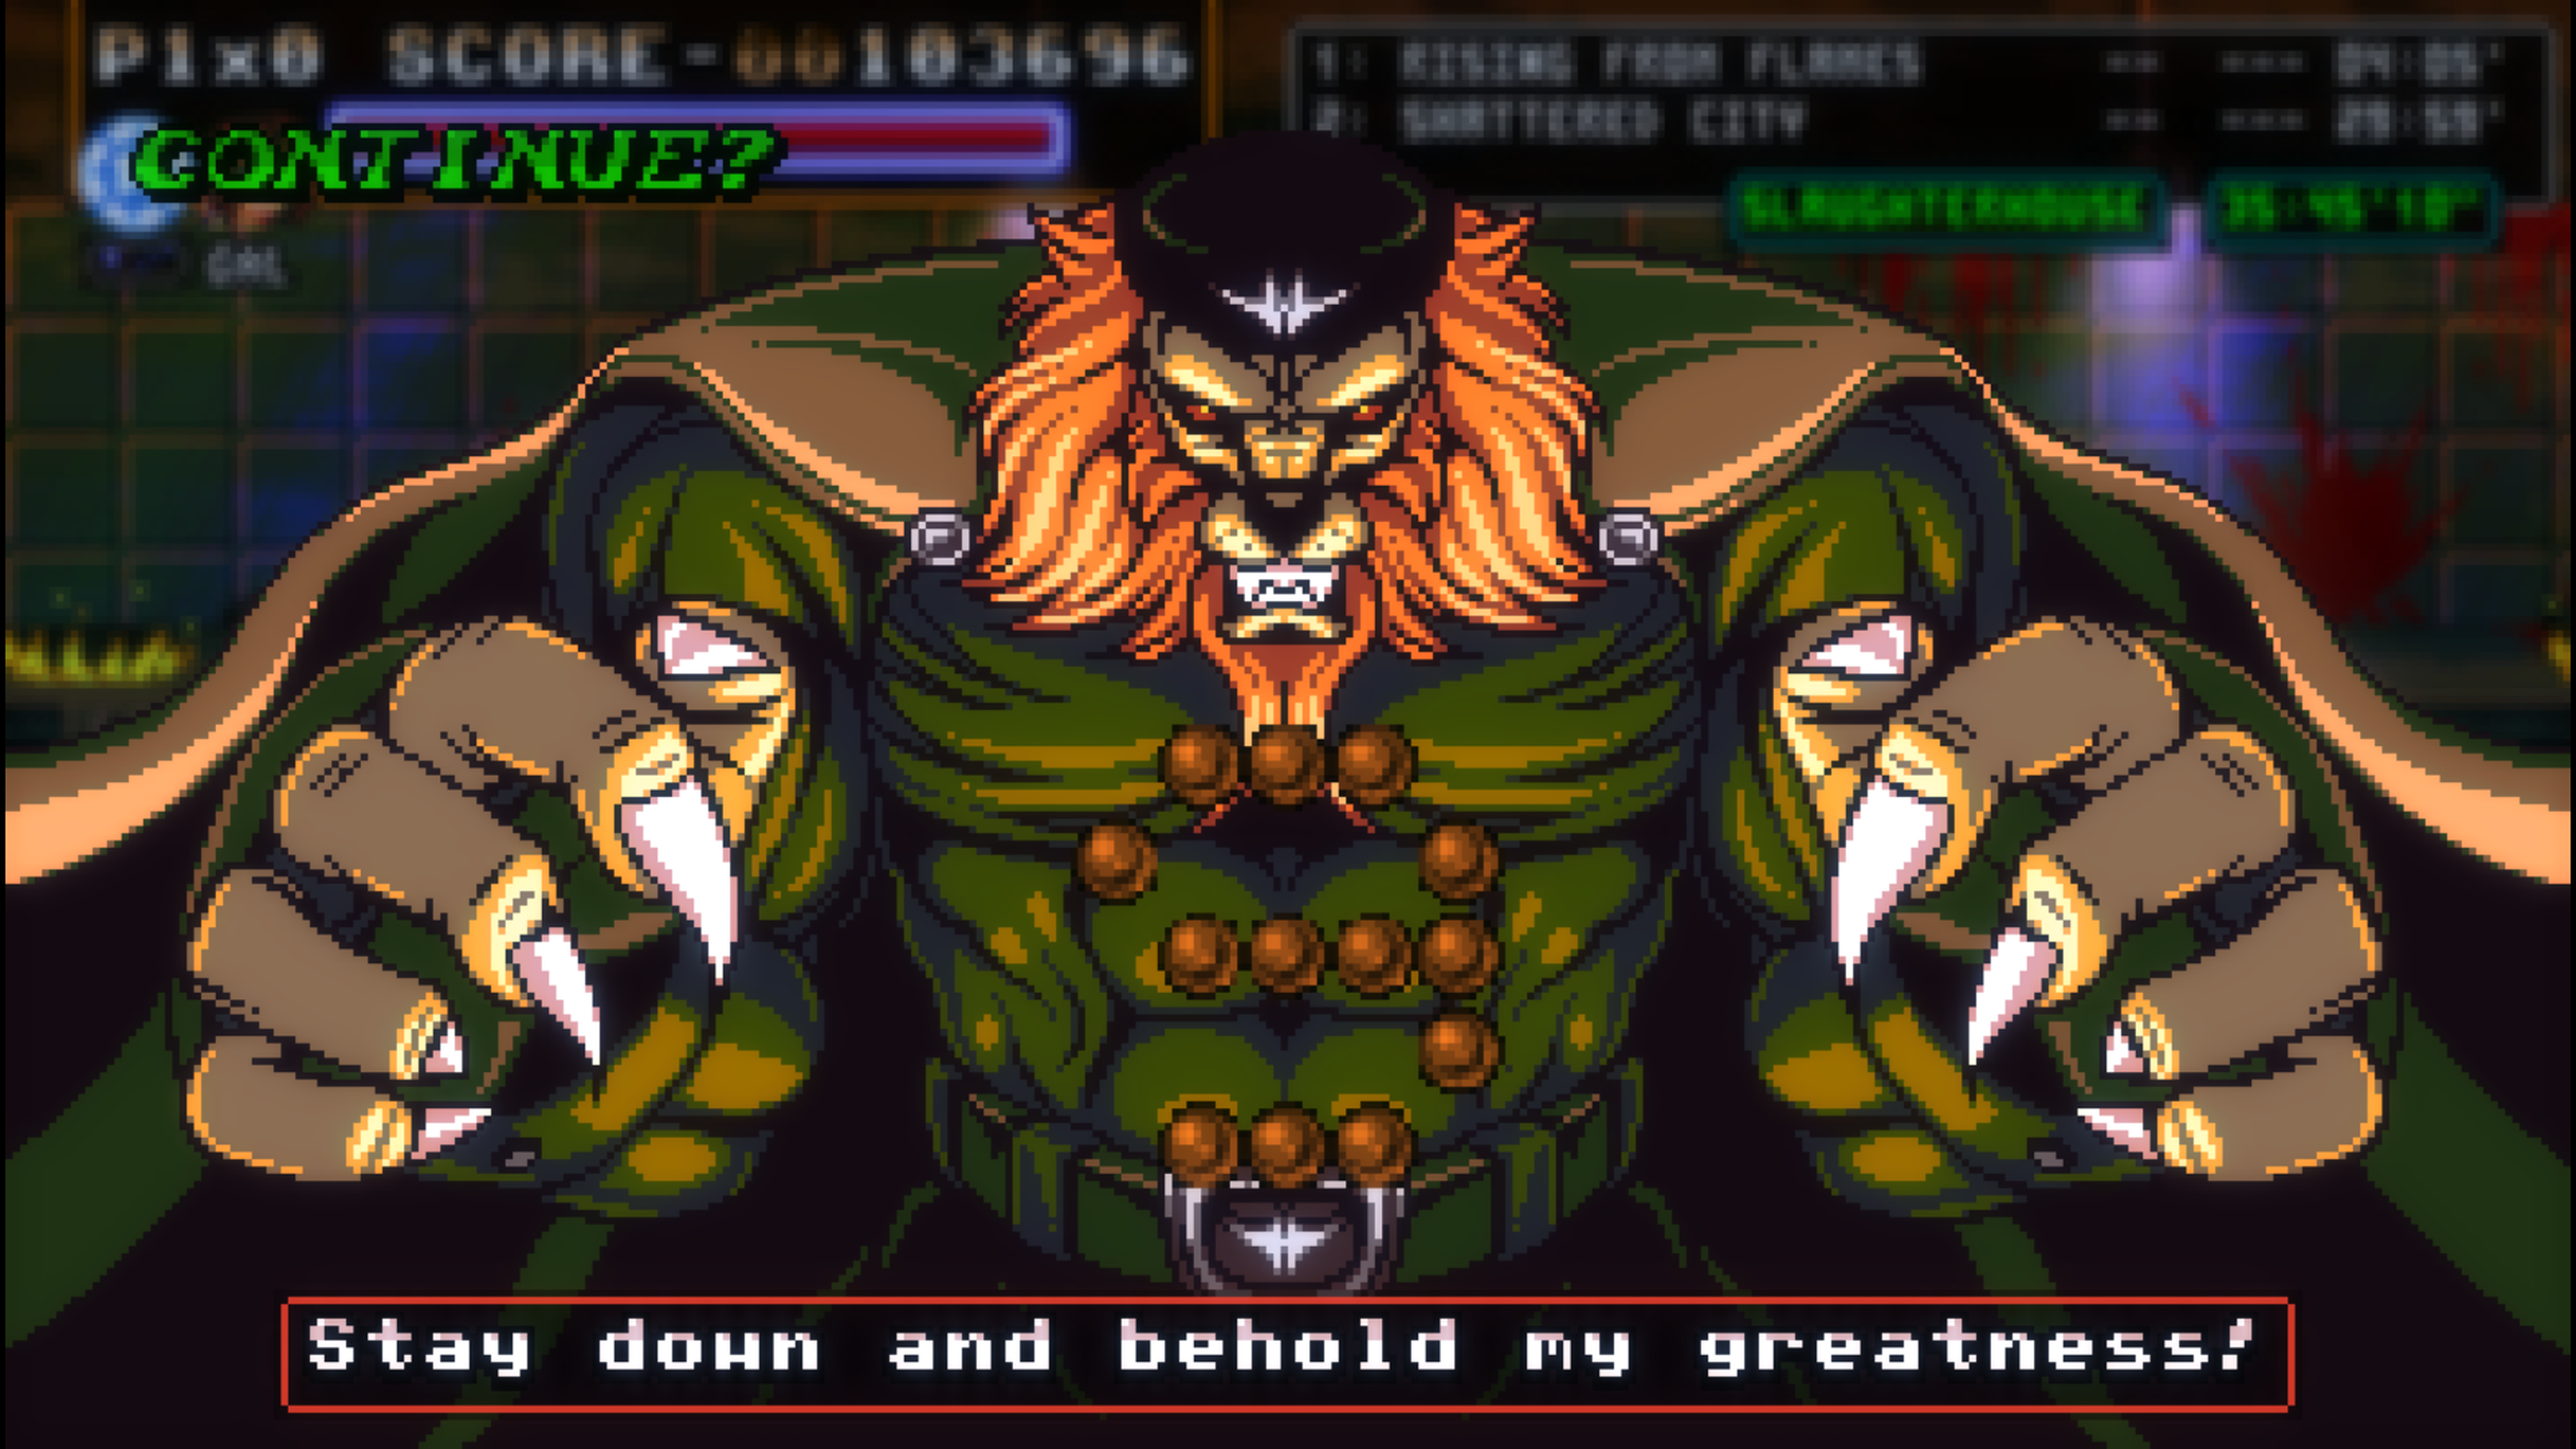 Pixel art of a menacing mutated lion wearing a green outfit, brown cloak and a military style black hat with a silver emblem on the front. Below the character reads "Say down and behold my greatness!". To the lower middle of the image is the digit 9 with green text in the top left reading "Continue?"